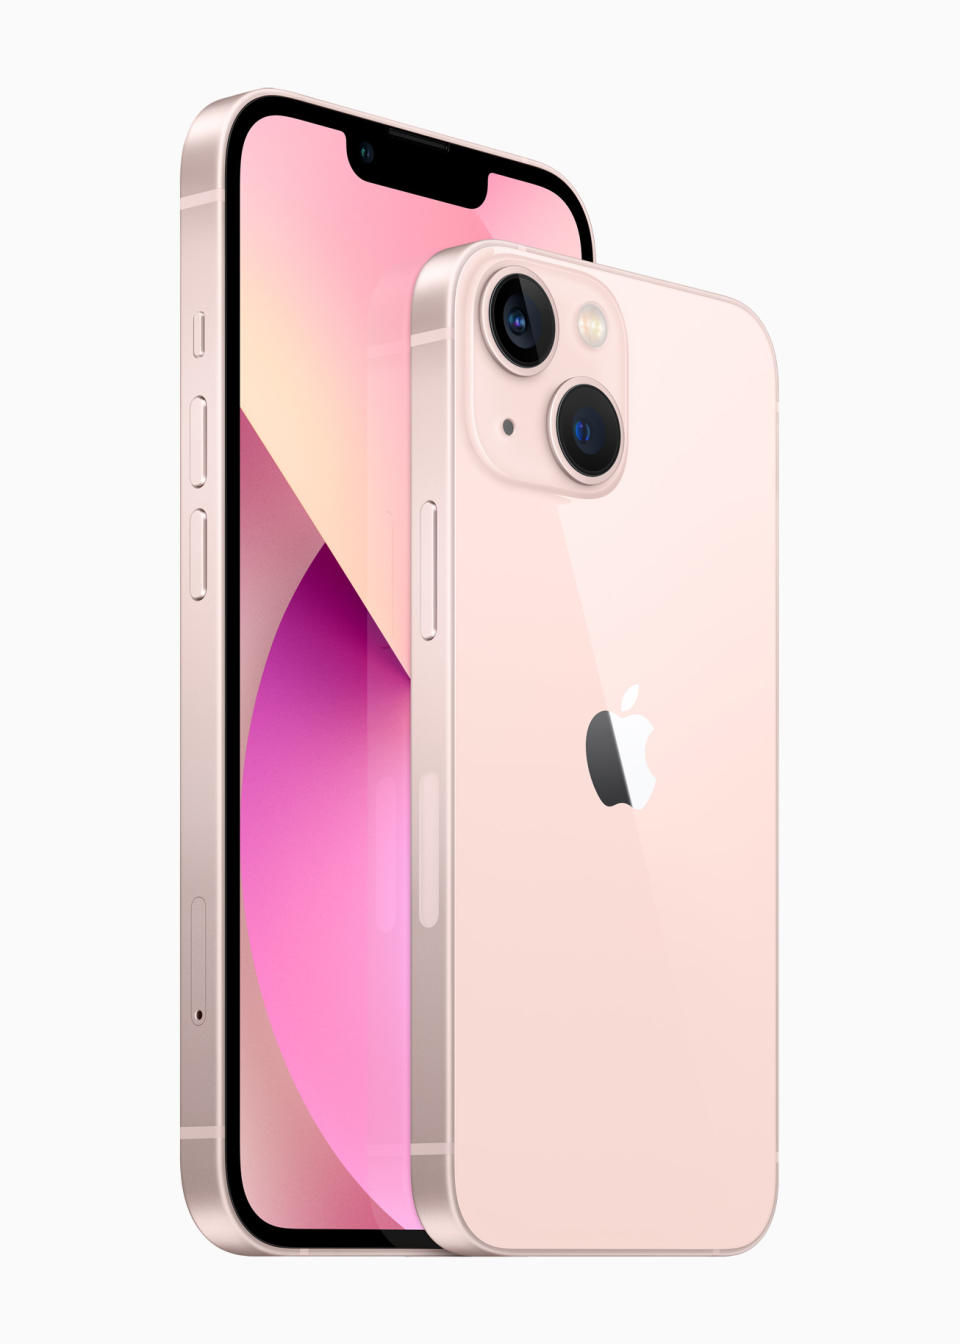 Pink is one of five new colors for the iPhone 13, which also include blue, midnight, starlight and Product (Red). - Credit: Courtesy images